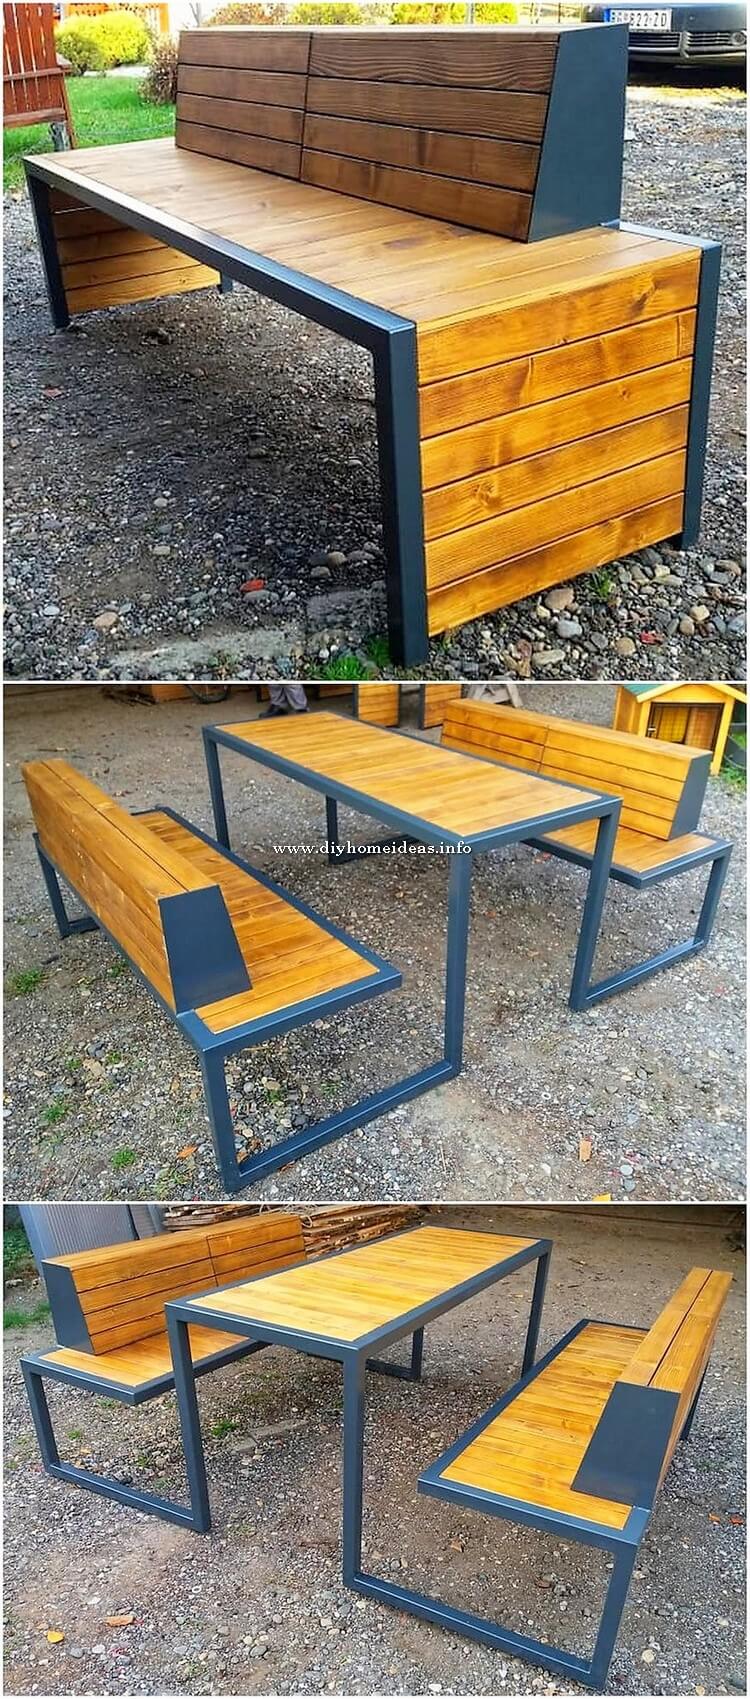 Wood Pallet Benches and Table